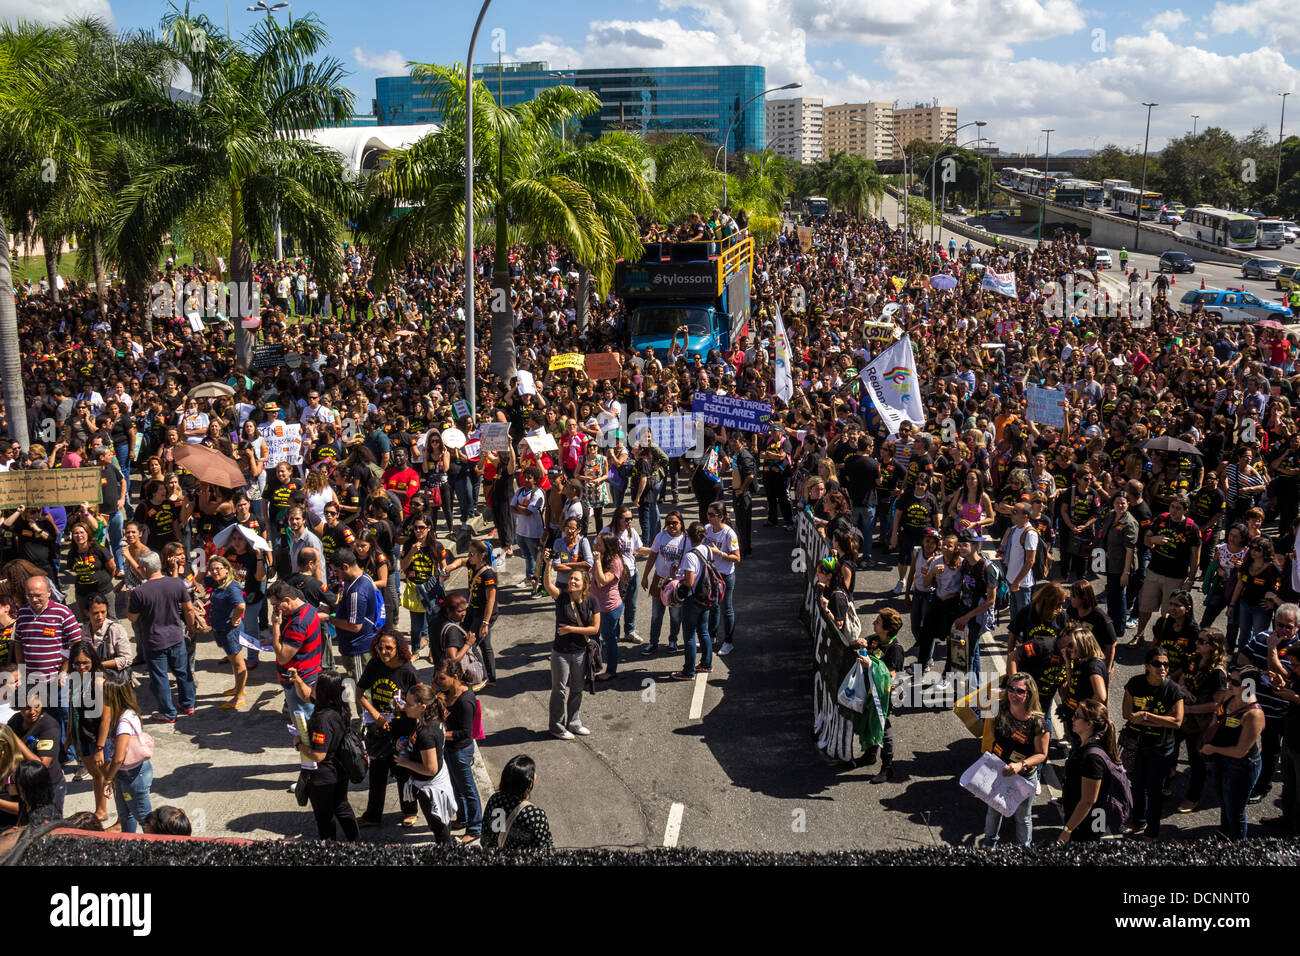 August 20, 2013 – Teacher of the city of Rio de Janeiro in Greve. 20,000 professionals go to the streets to protest the mayor Ed Stock Photo